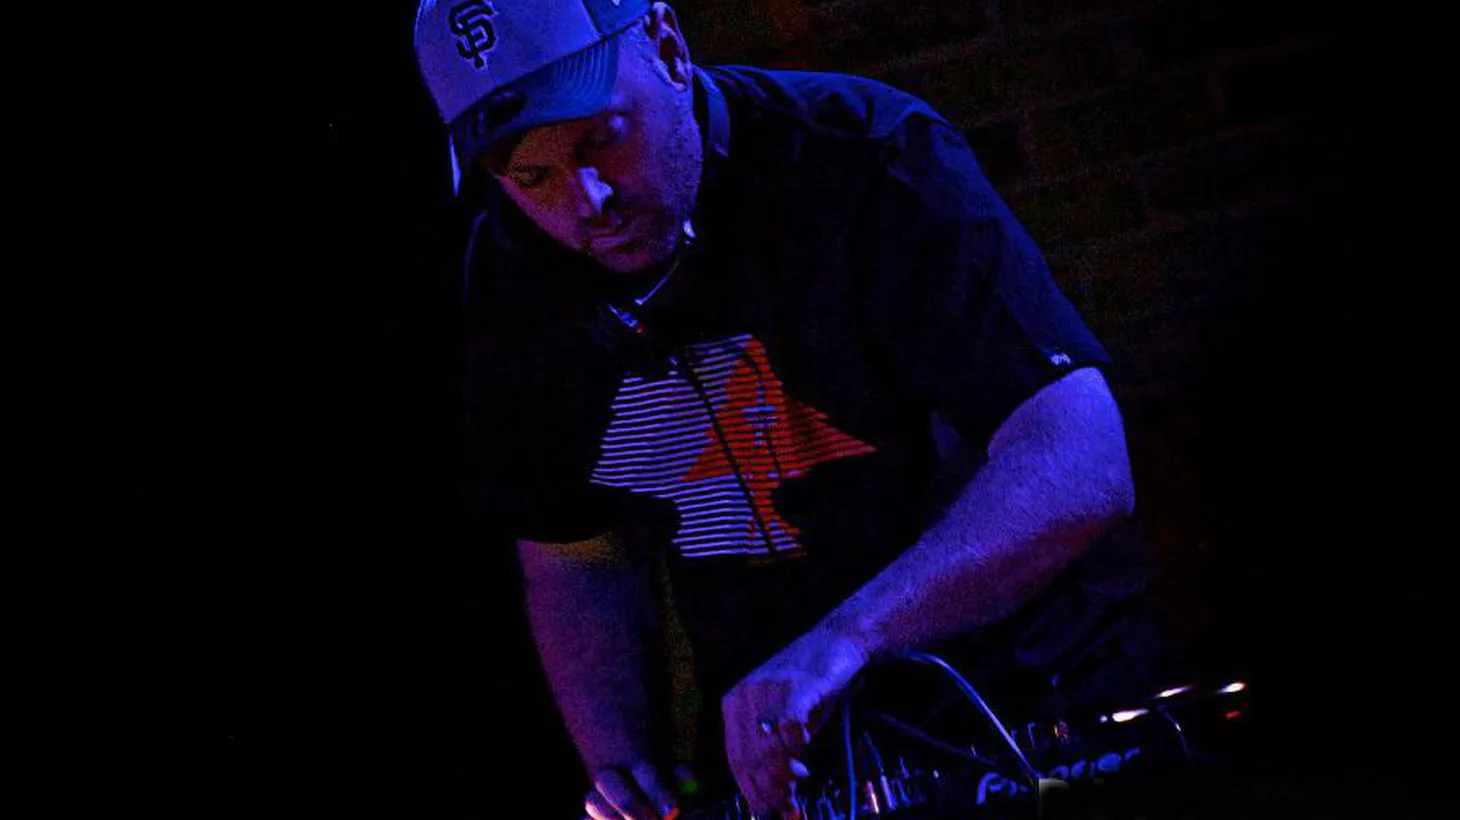 Sound architect DJ Shadow is a pioneer in electronic music...